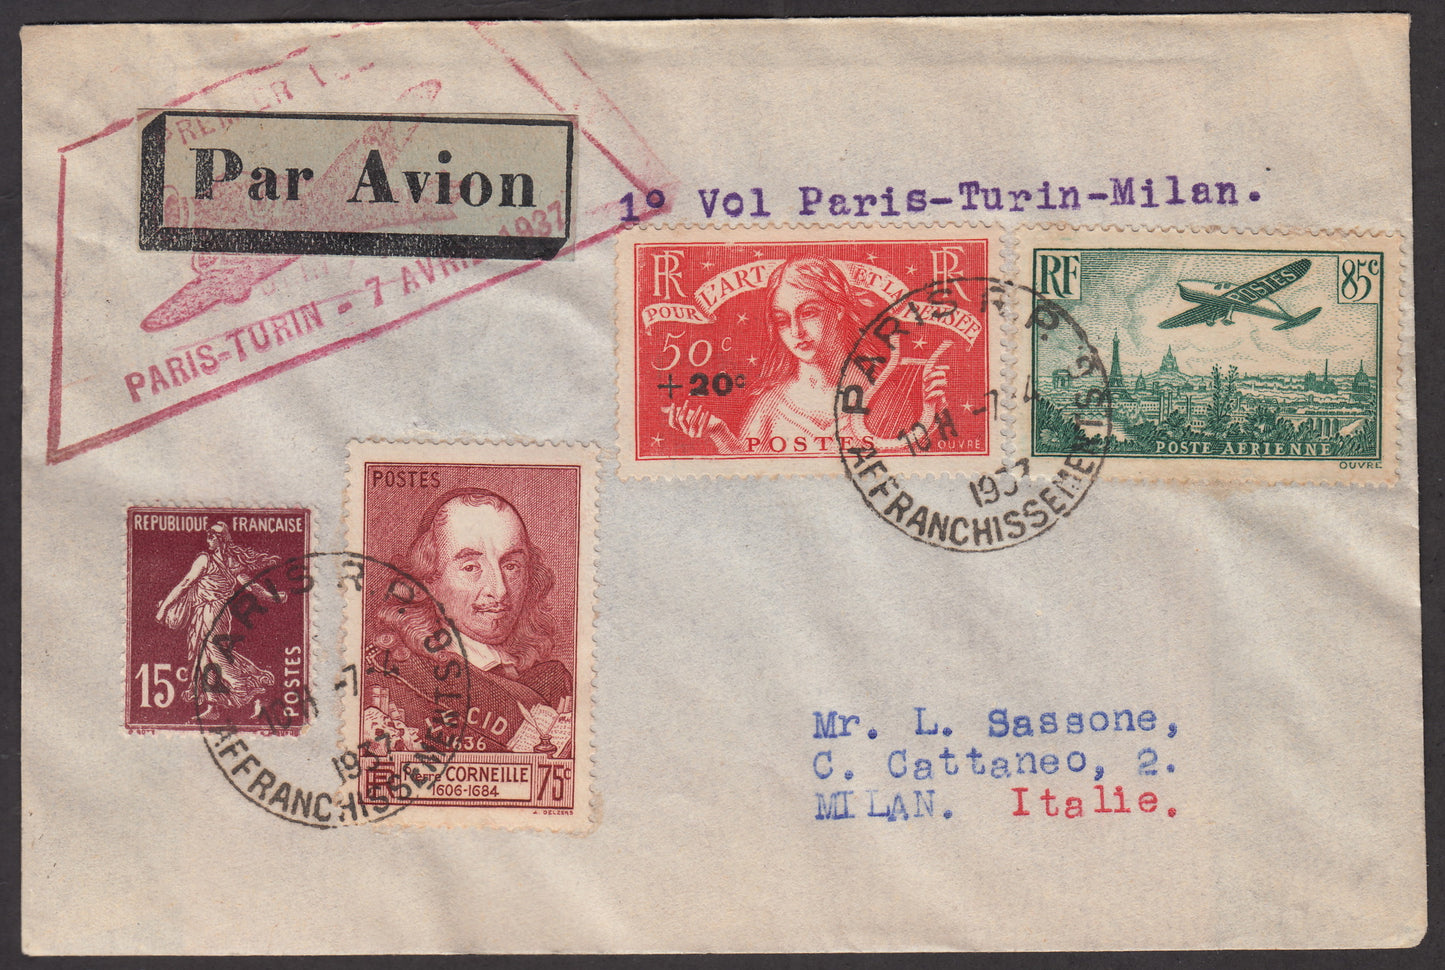 1937 - First flight Paris - Turin - Milan 7/4/37 with French stamps, directed to Luigi Sassone 